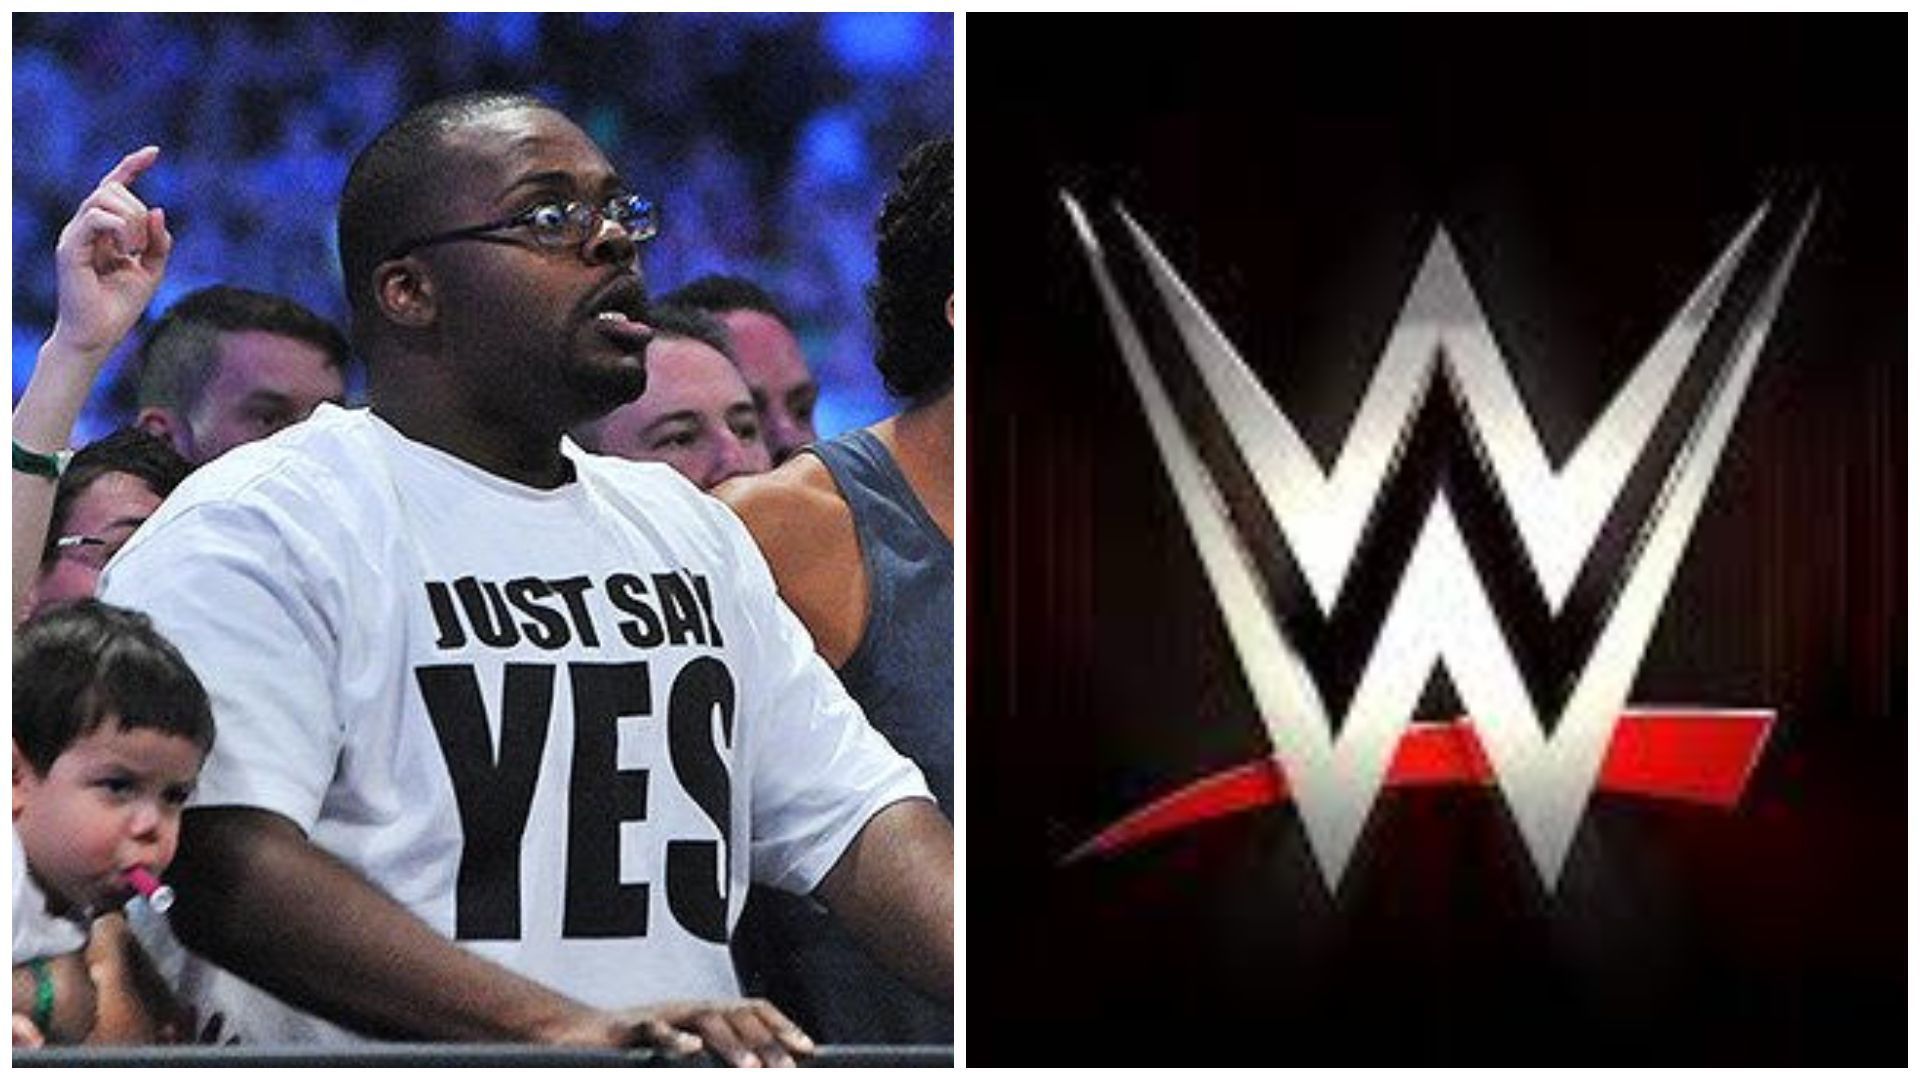 WWE fans shocked watching a major betrayal during a show.